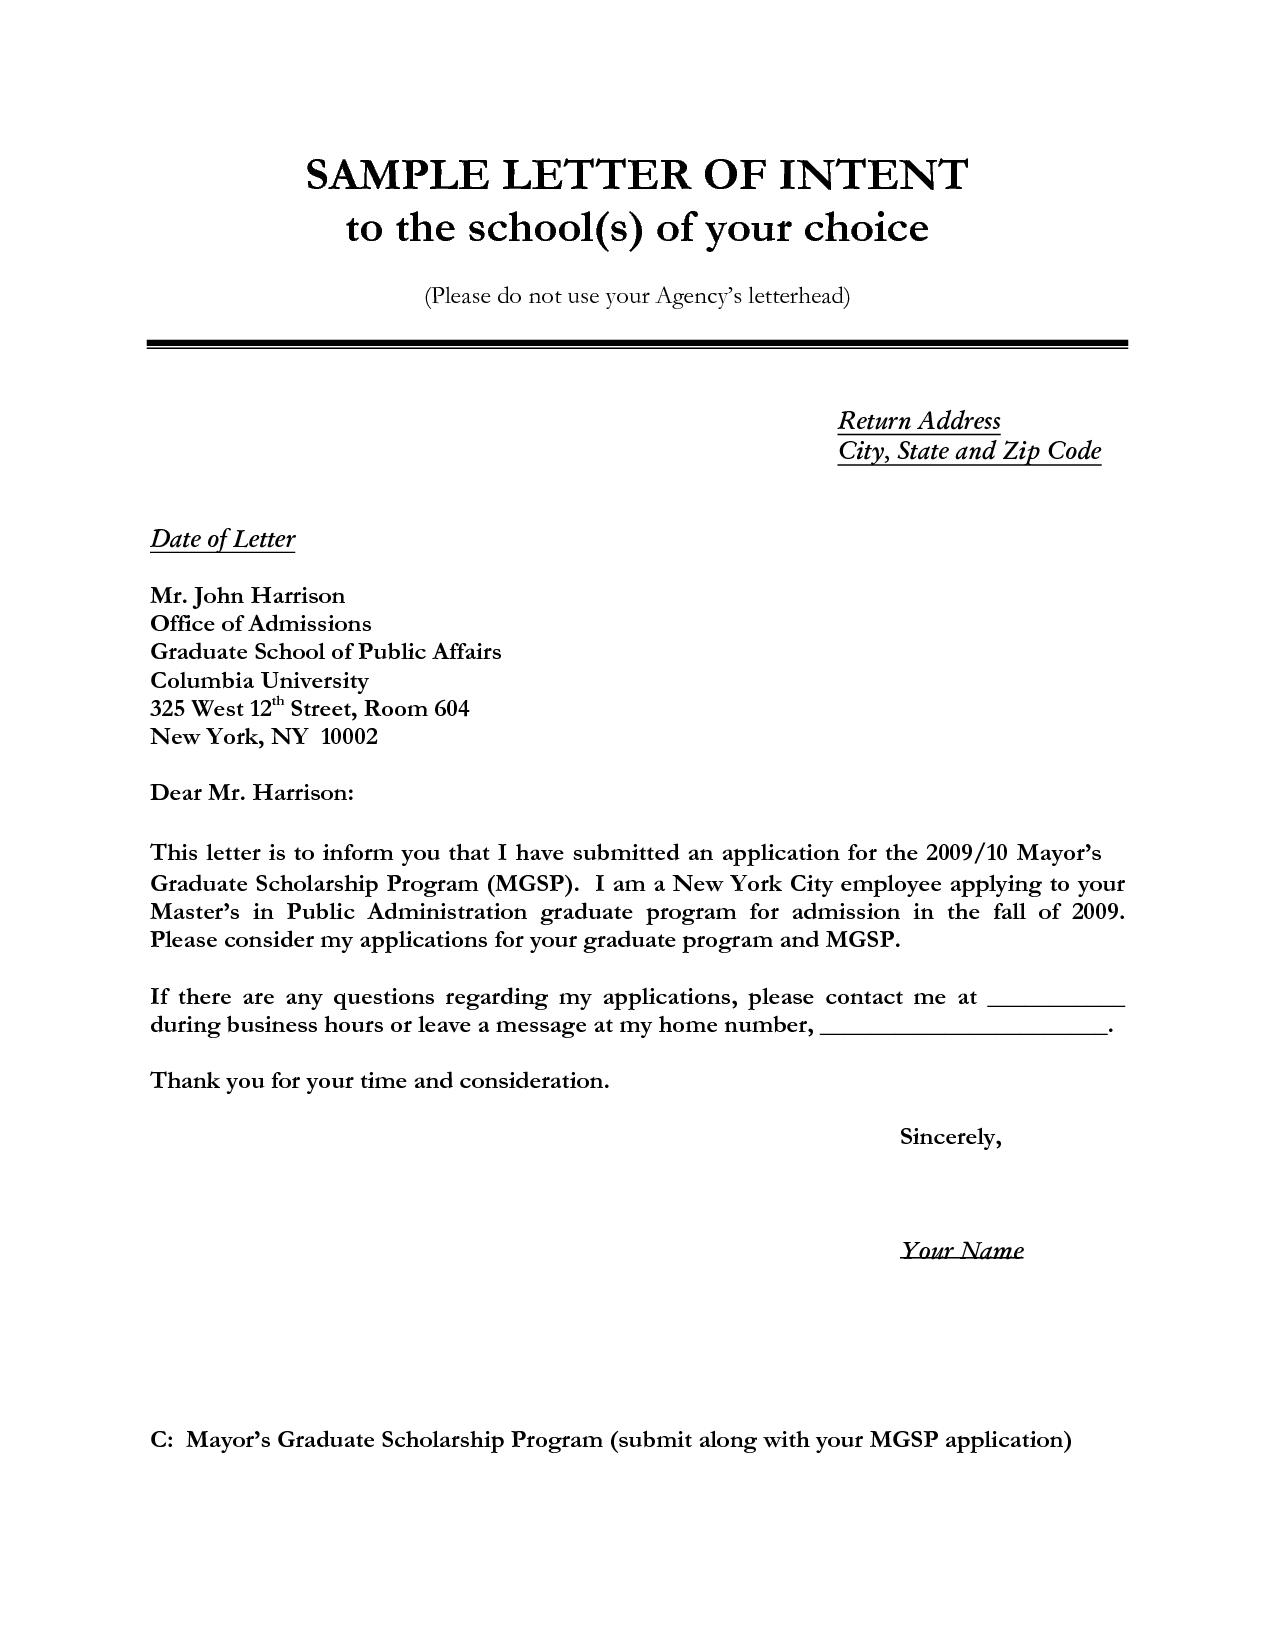 Late Rent Letter Template - Letter Of Intent Sample